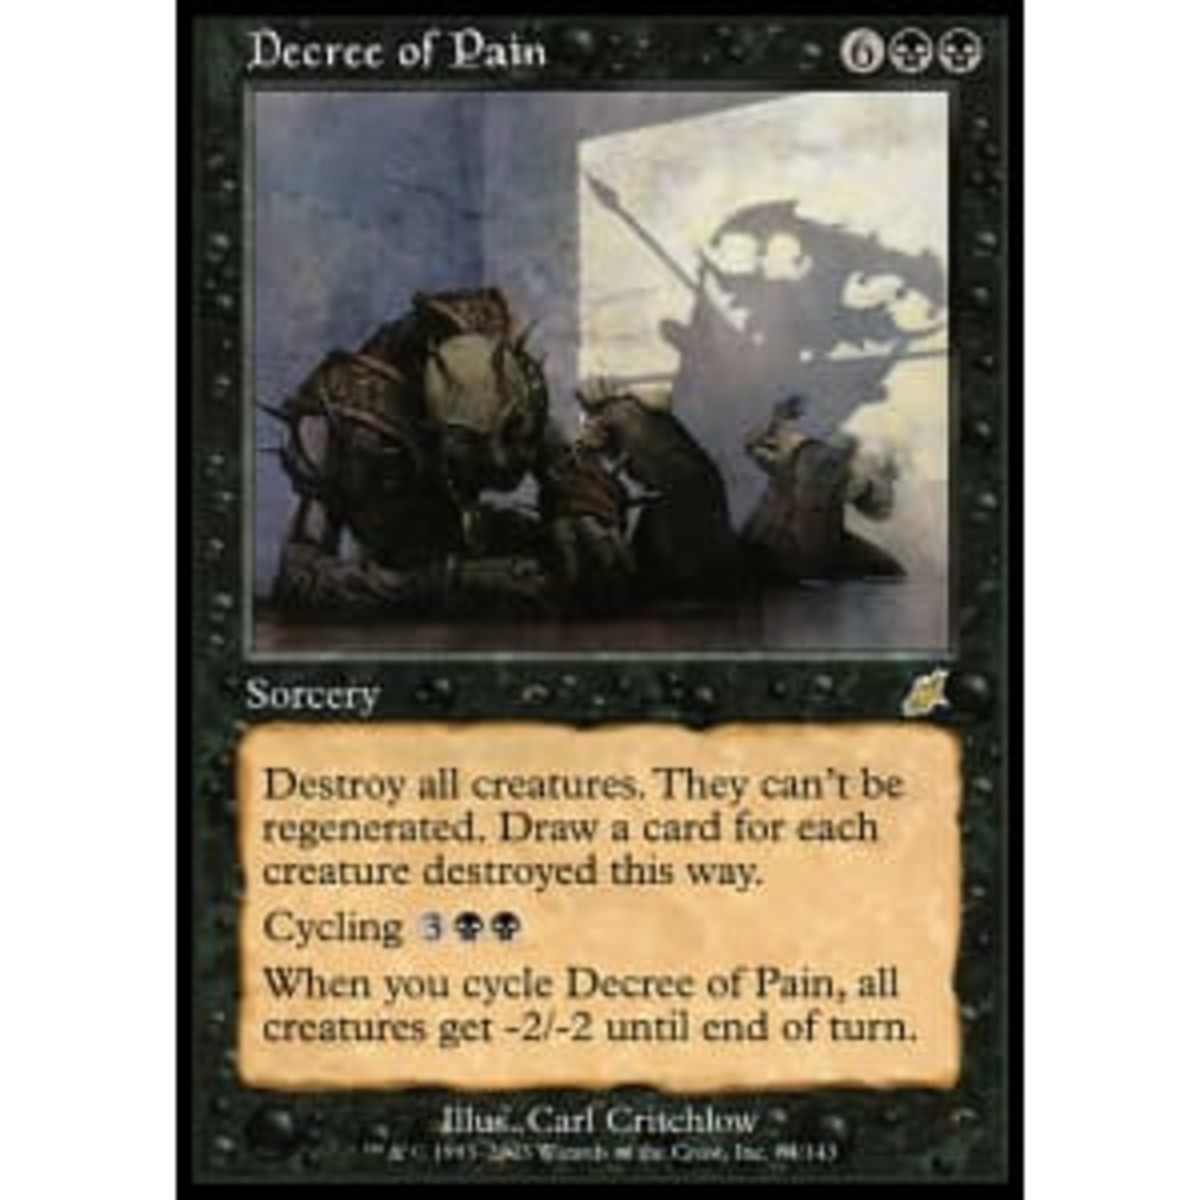 Big Bad Black Cards for Magic The Gathering EDH Format